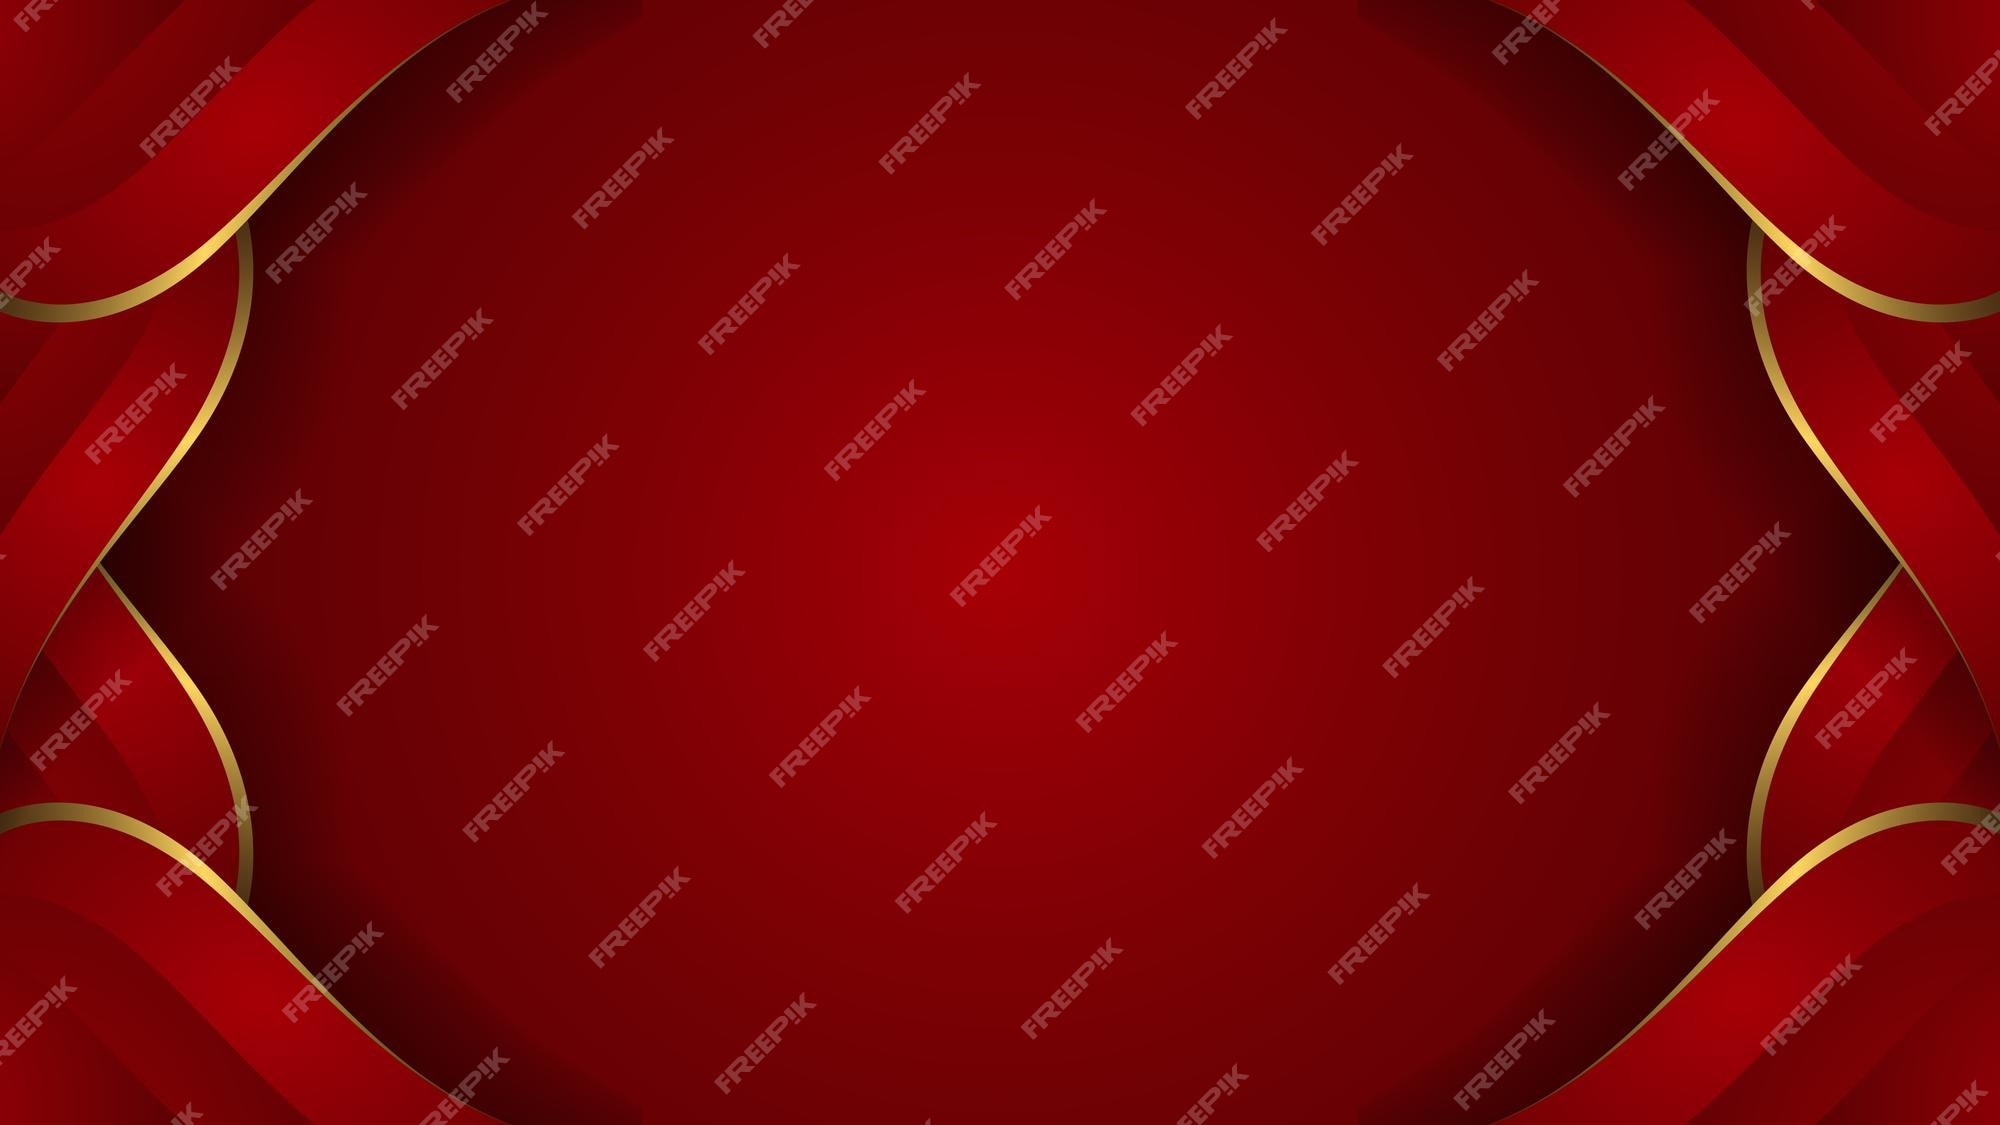 Premium Vector | Red background with luxury gold